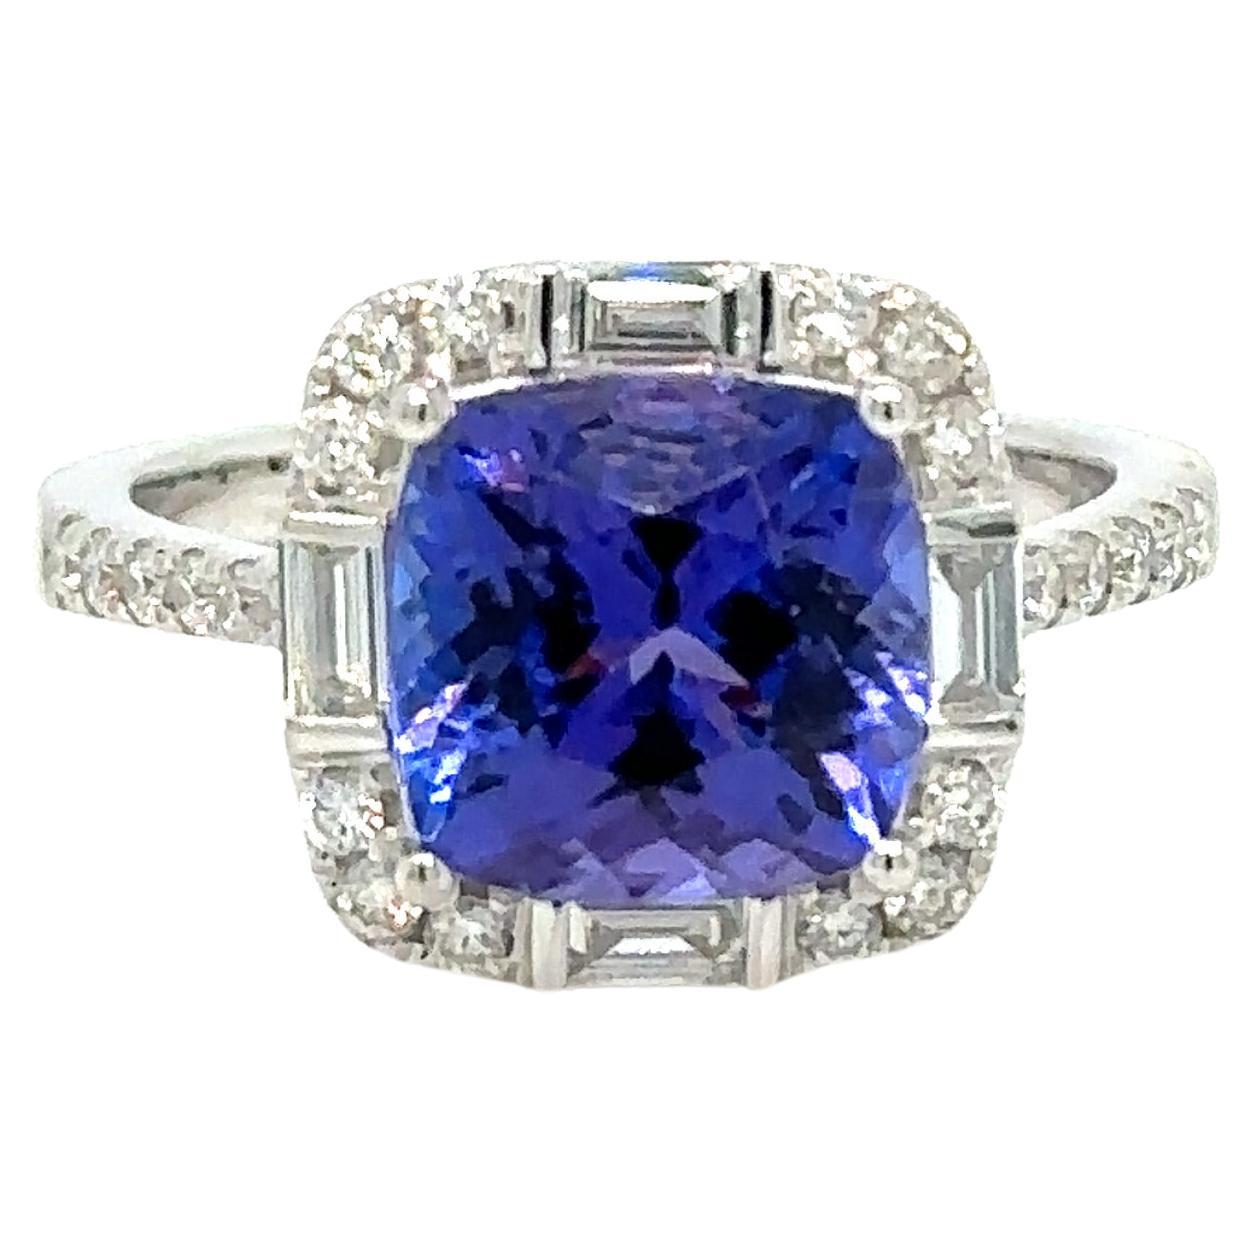 Cushion-shape Tanzanite Ring with bright Diamonds from all corners and sizes.

Secure Yours Today: Limited stock available. Don't miss the chance to secure your Tanzanite Diamond Ring today. It's not just a ring; it's a way of fashion.

Product